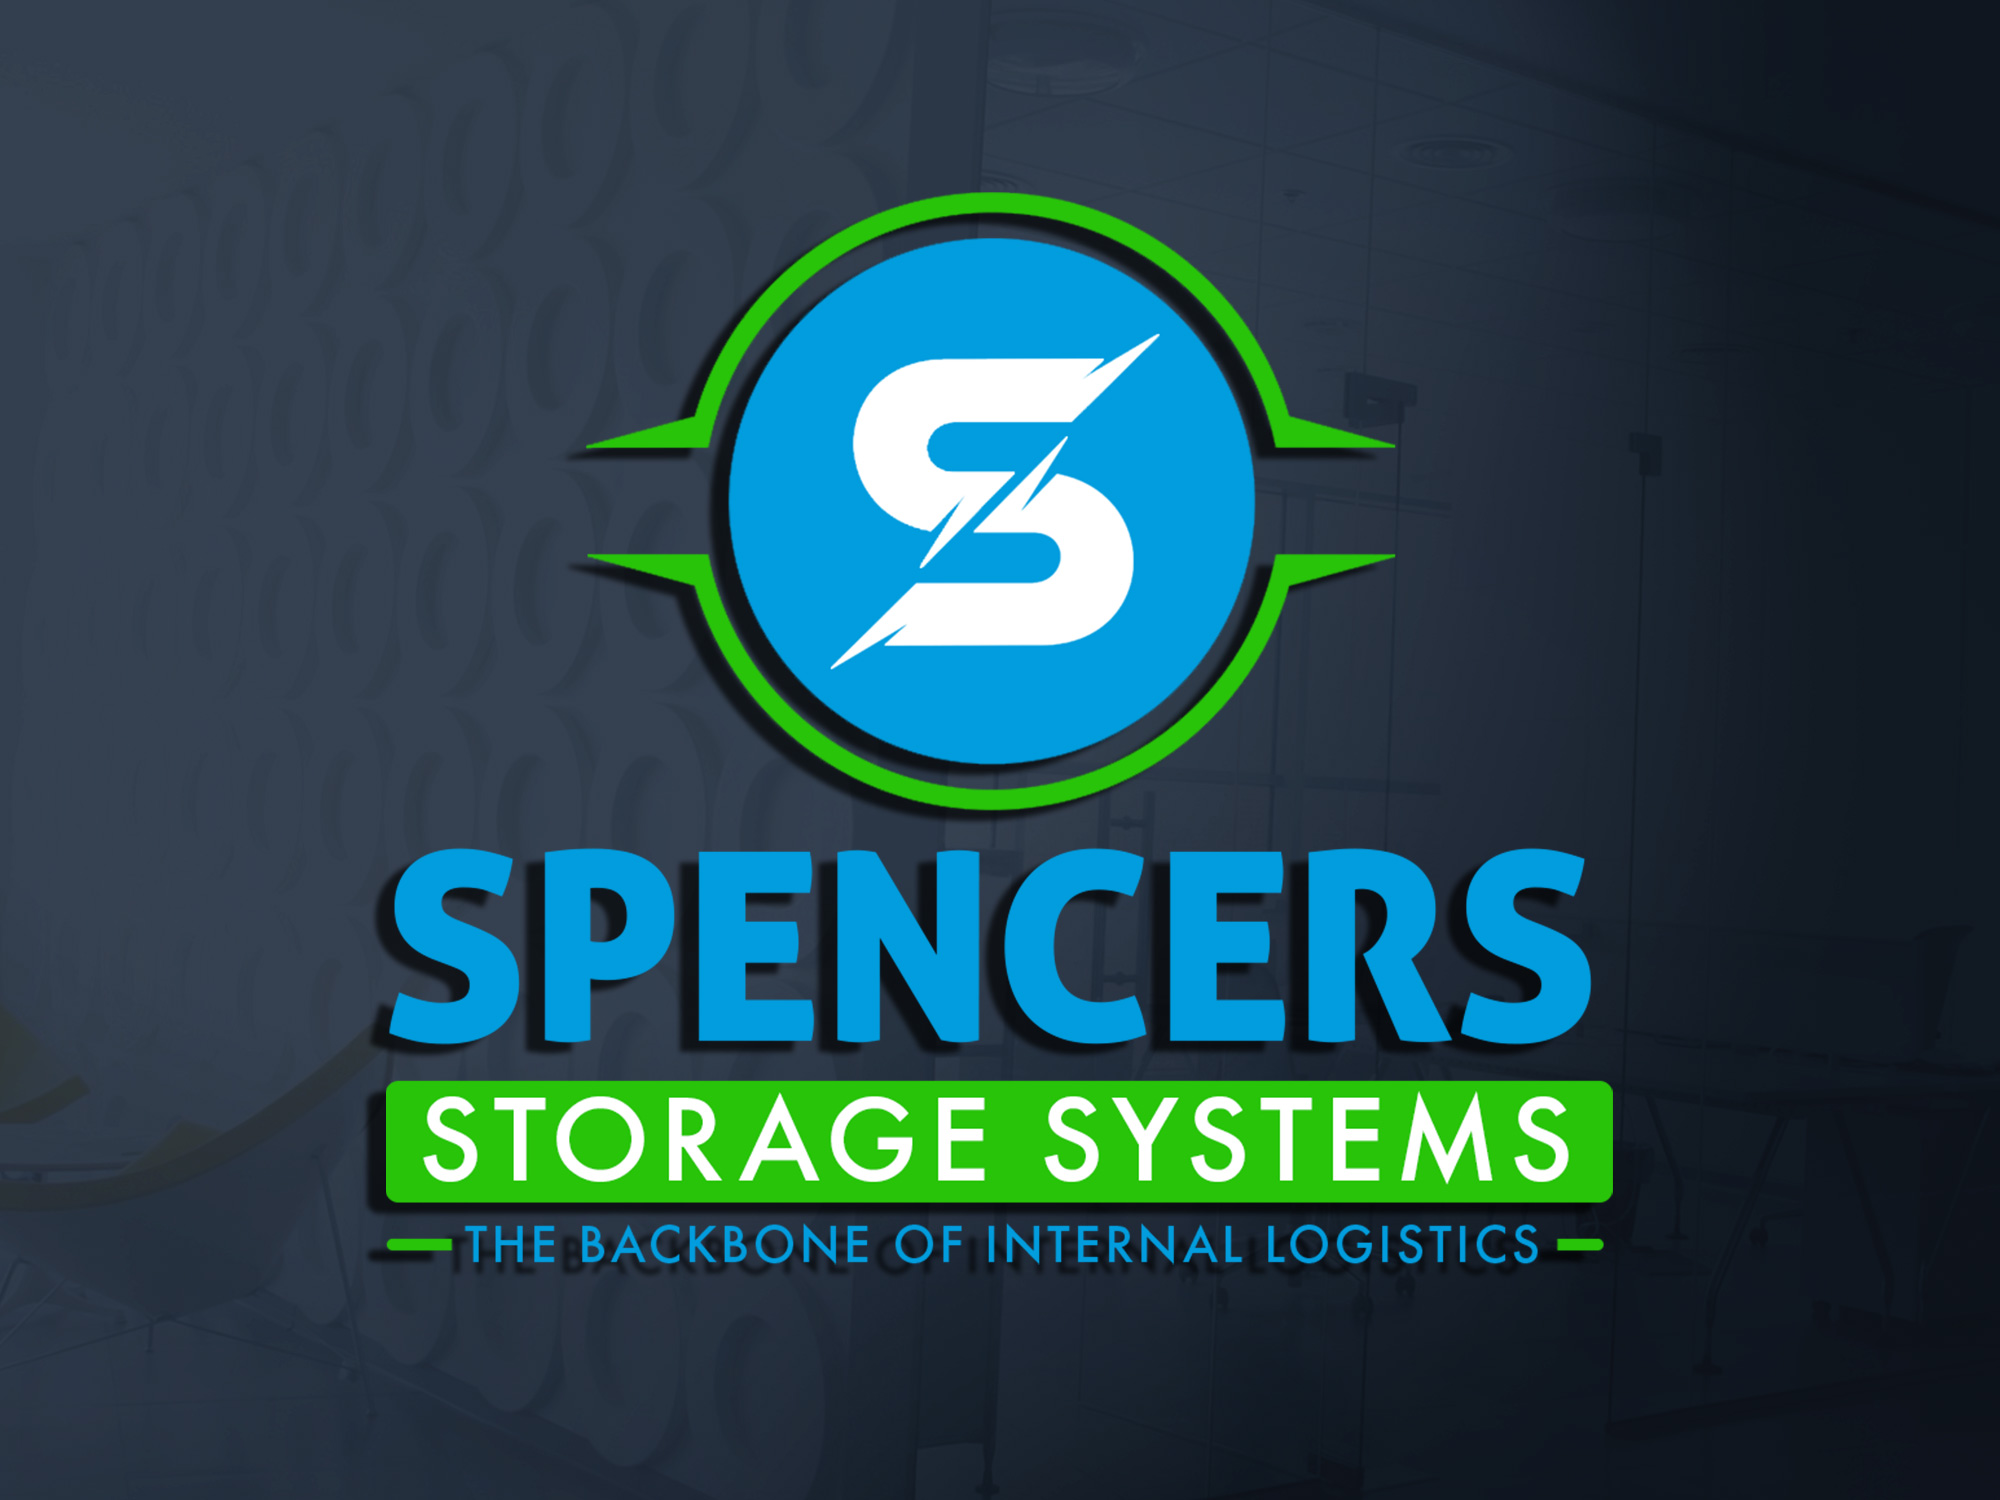 SPENCERS STORAGE SYSTEMS